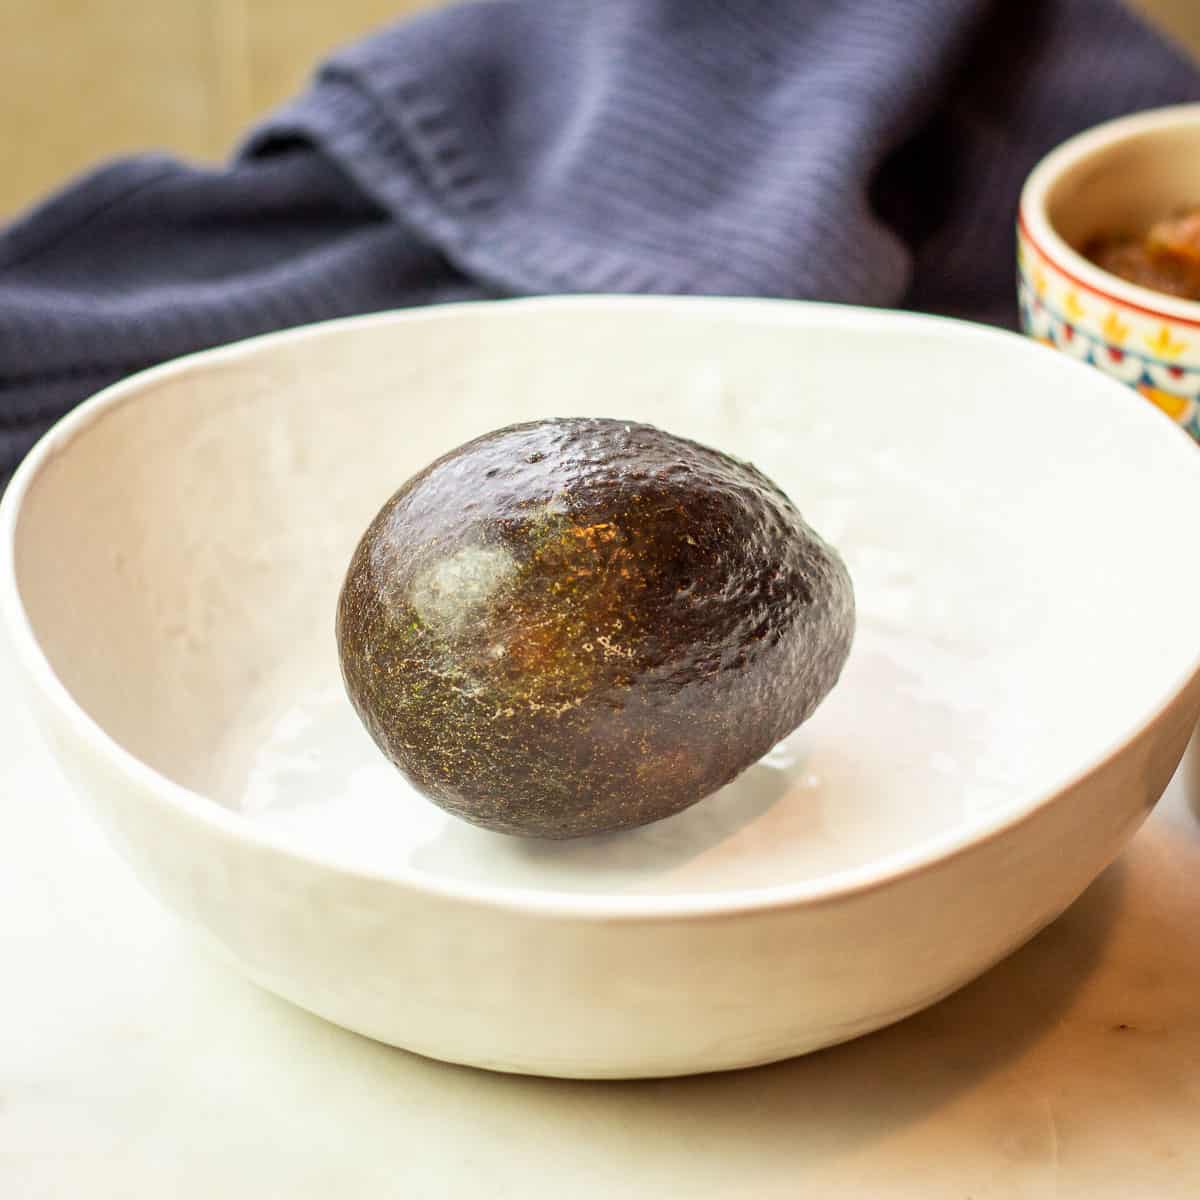 Image of a perfectly ripe avocado pictured in a white bowl with blue kitchen towel nearby.